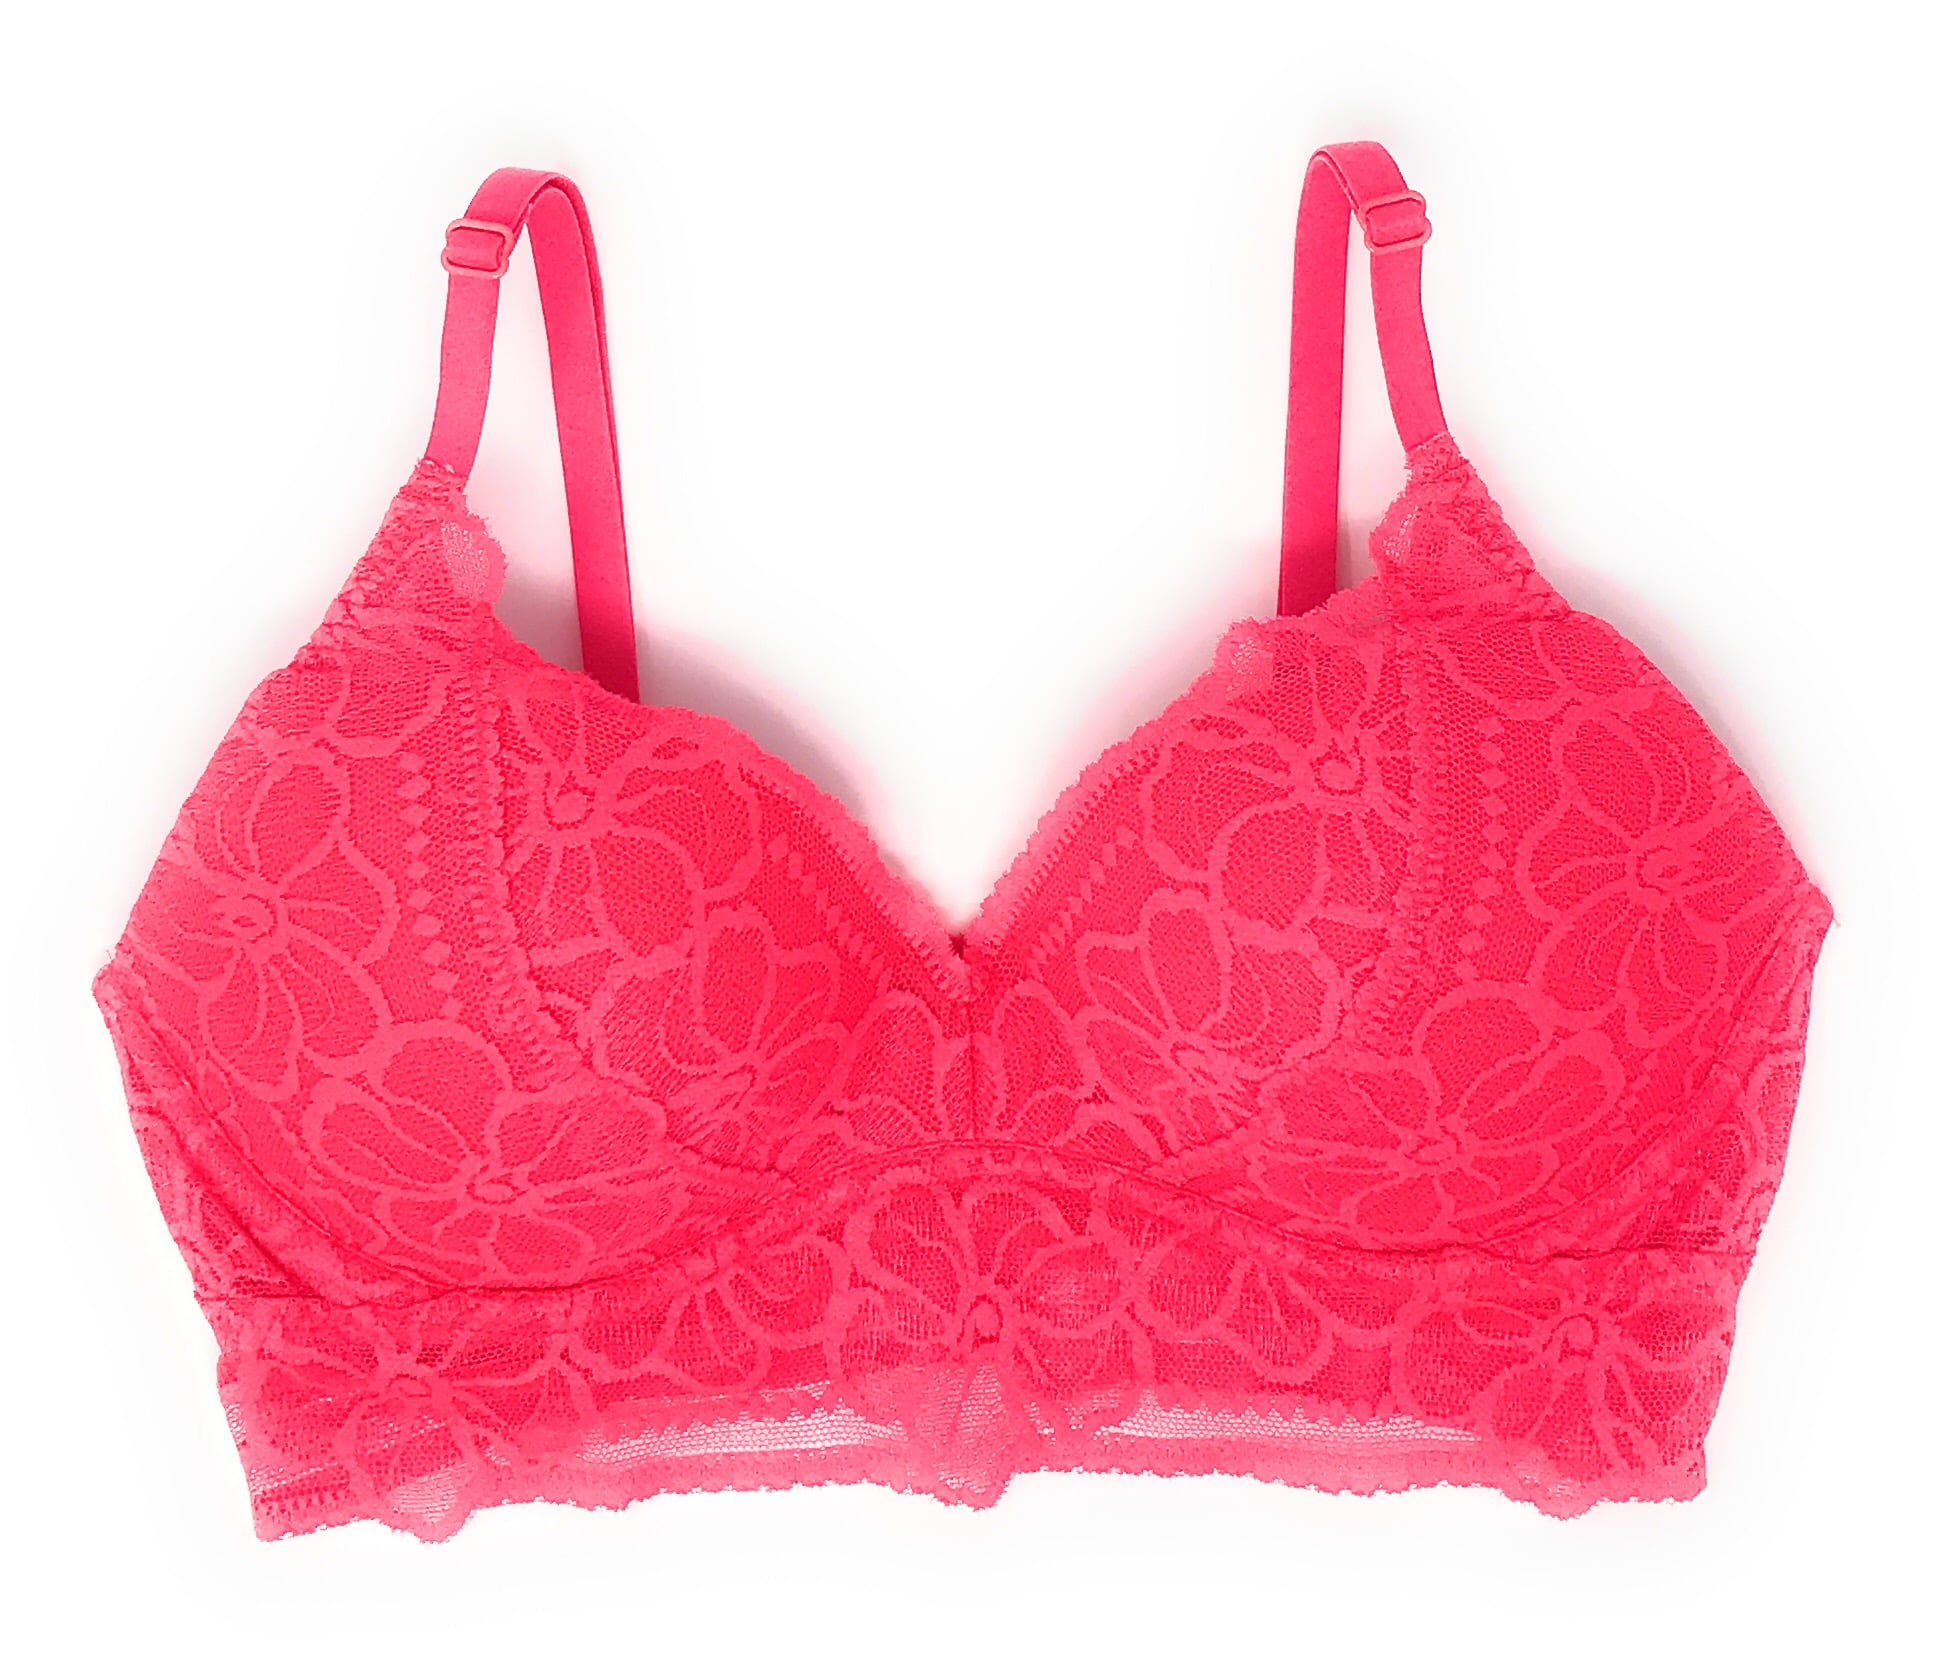 PINK - Victoria's Secret Victoria Secret Pink Lace Push Up Bralette Bra  Small Red Pink Purple - $23 - From Marie